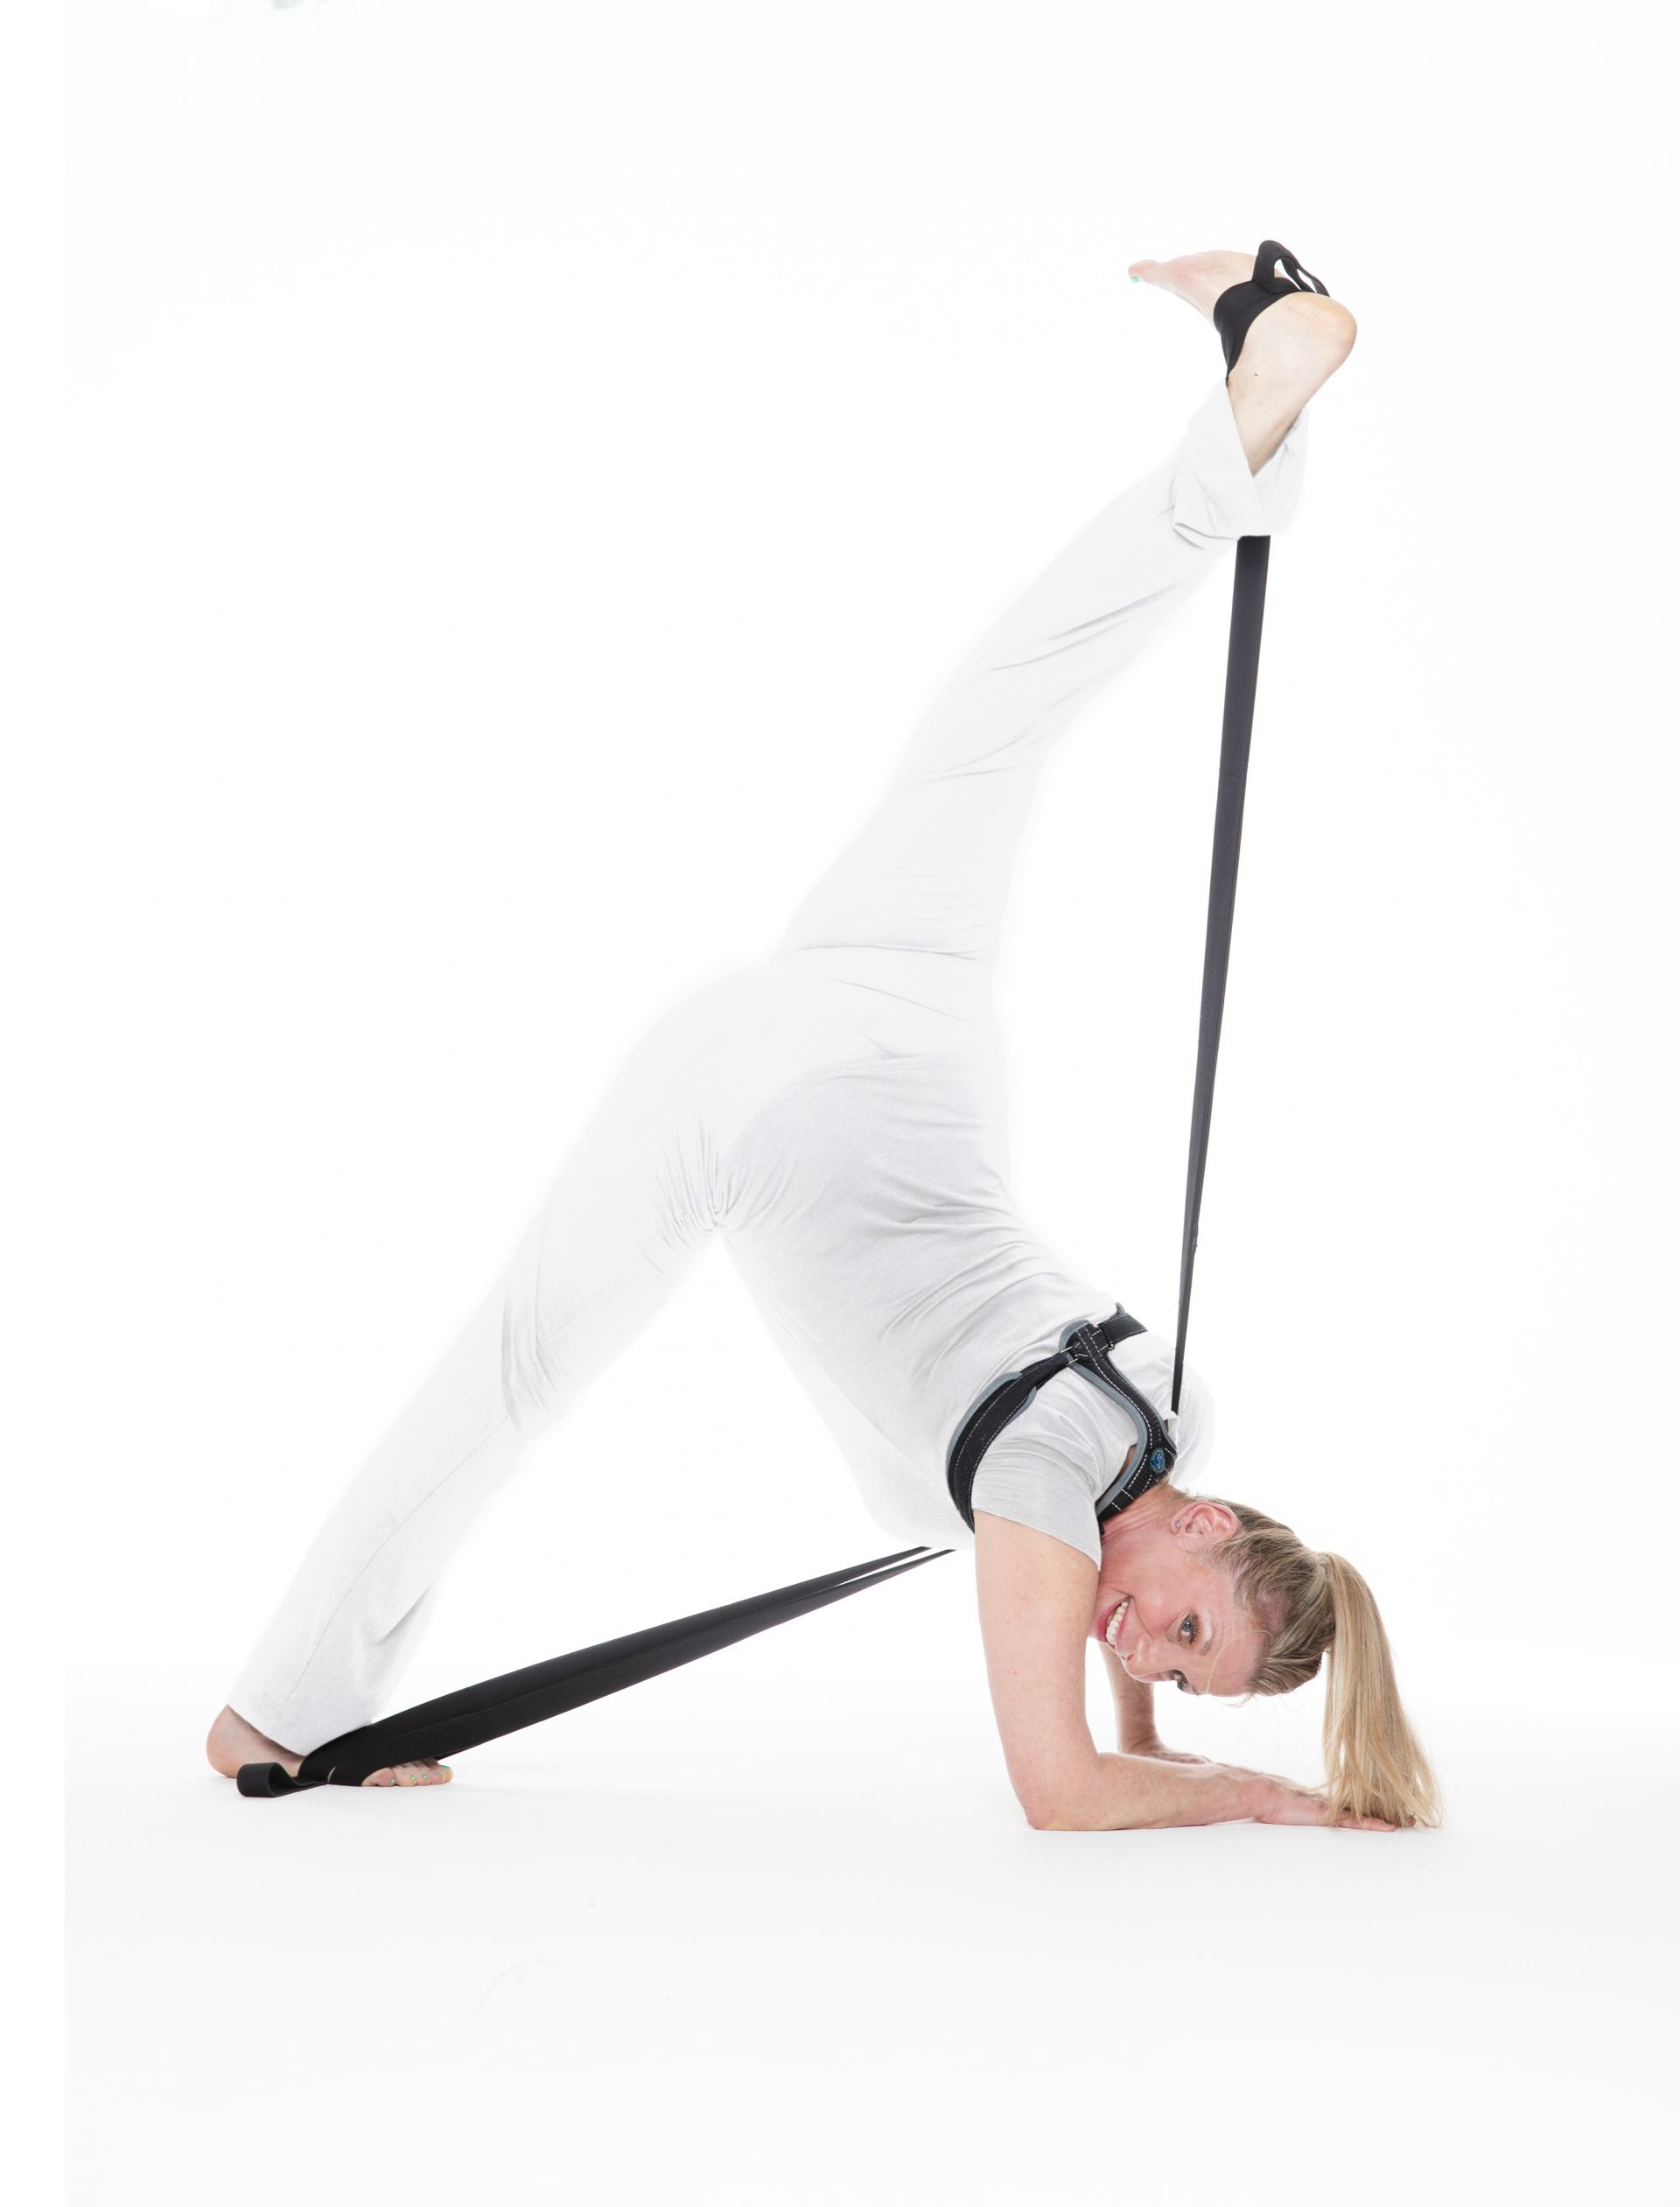 Stacey in penche standing over-split using Stacey Stretch Strap® & Stacey Posture Strap